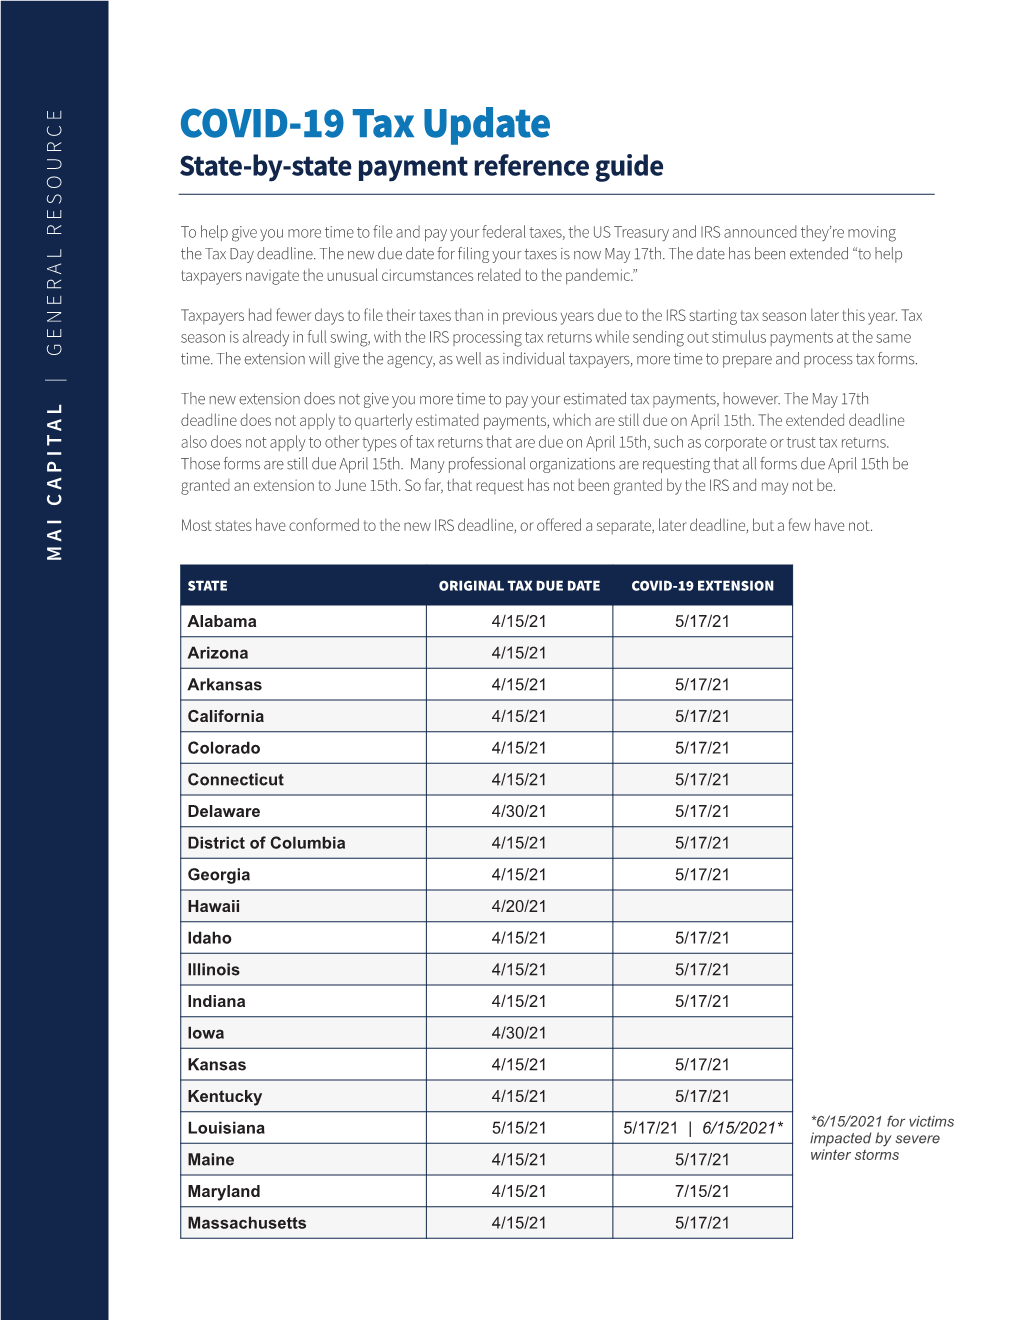 COVID-19 Tax Update State-By-State Payment Reference Guide